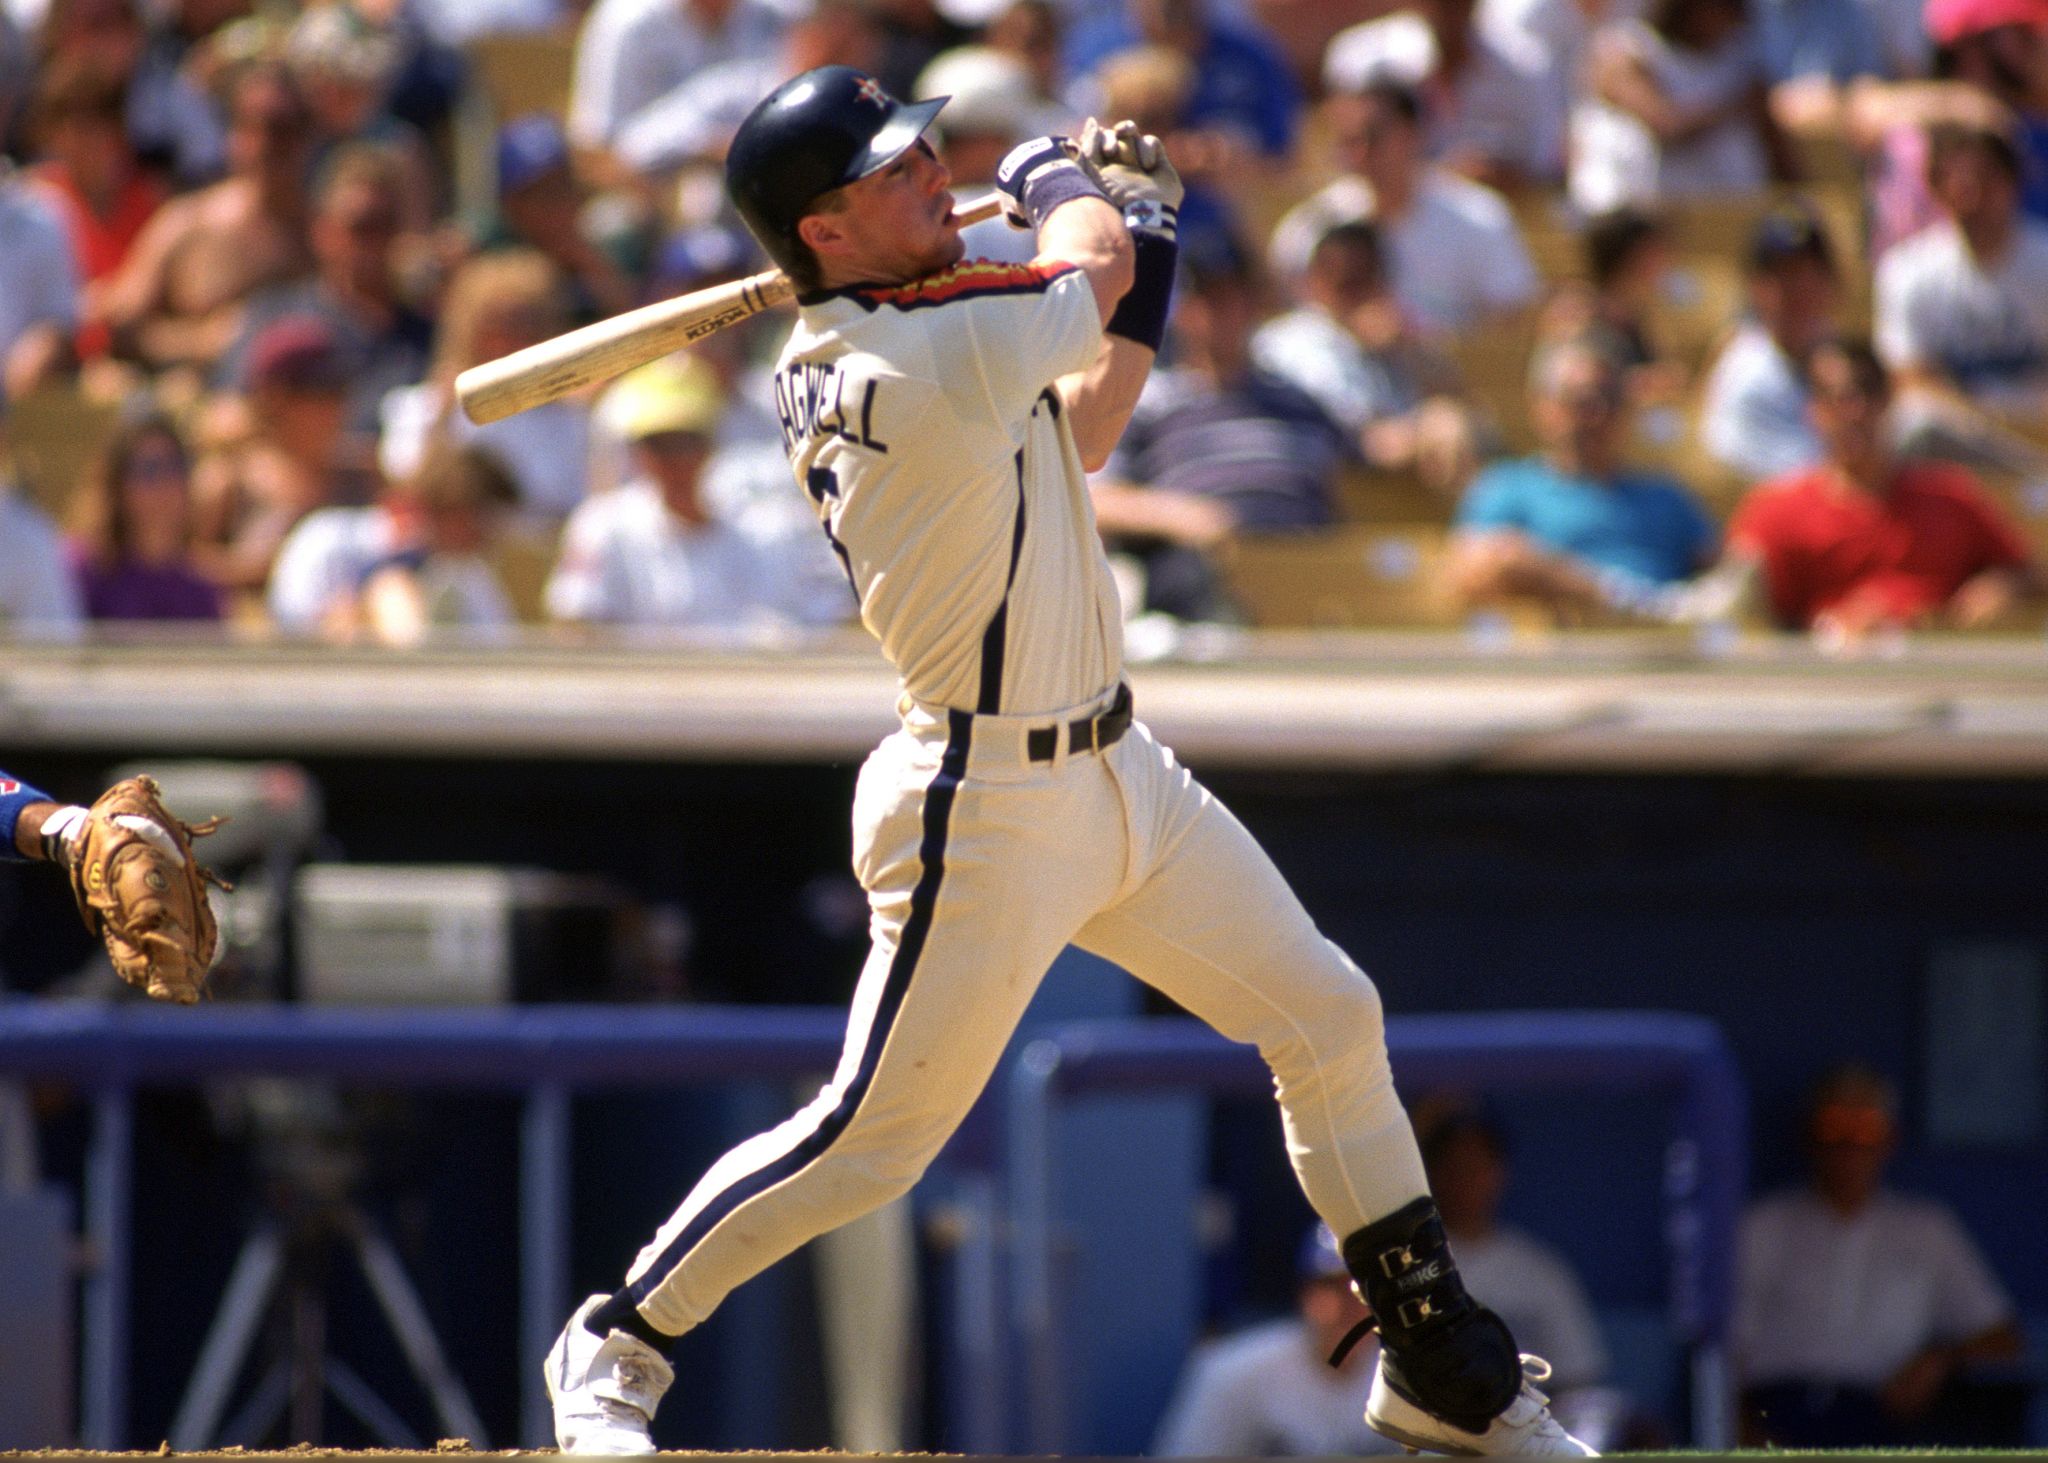 Astros icons Craig Biggio, Jeff Bagwell team up for first pitch